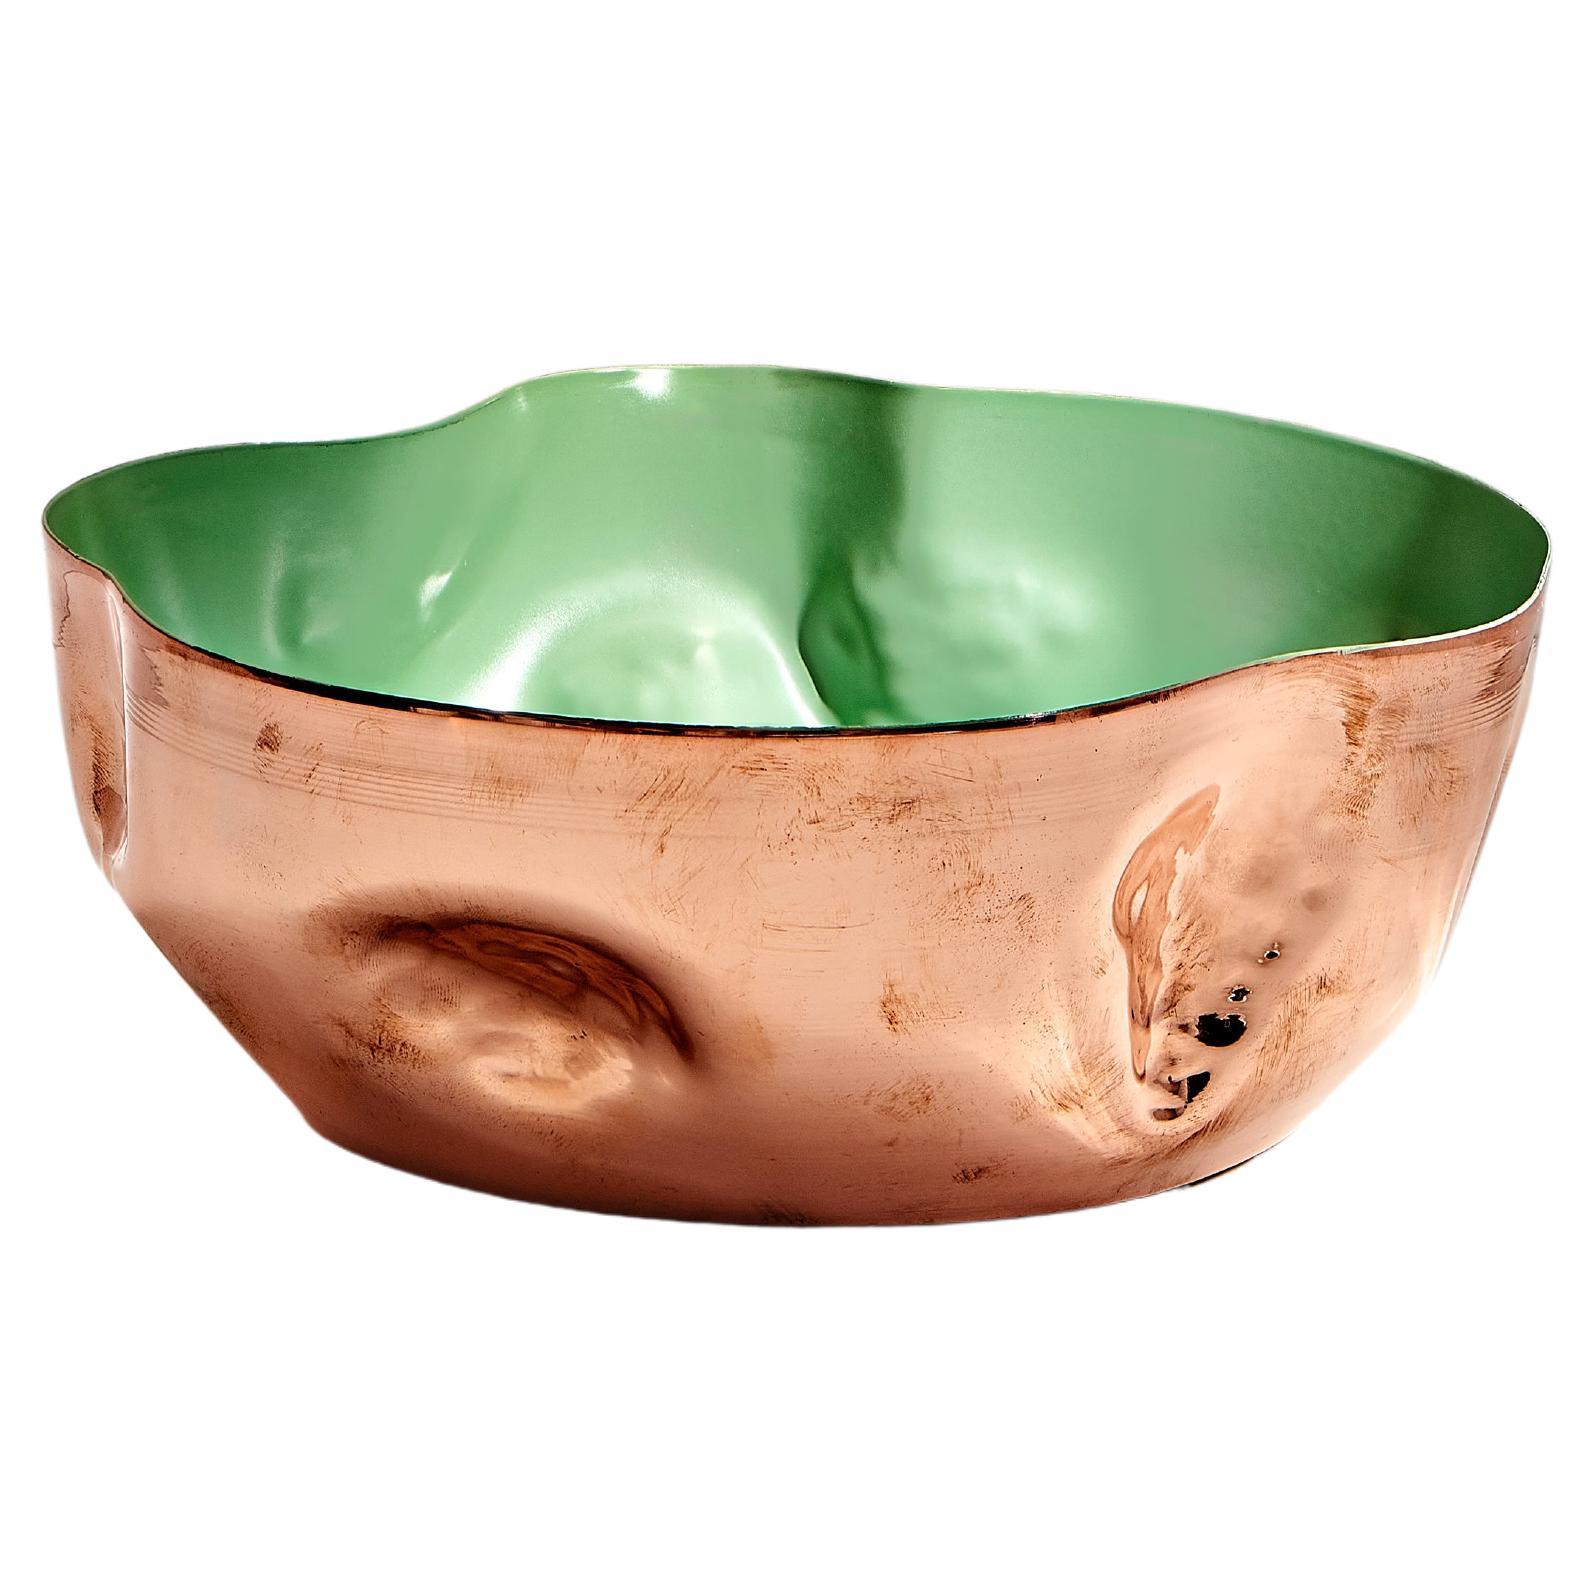 Momento Handmade Colourful Bowl by Jordan Keaney - Copper For Sale